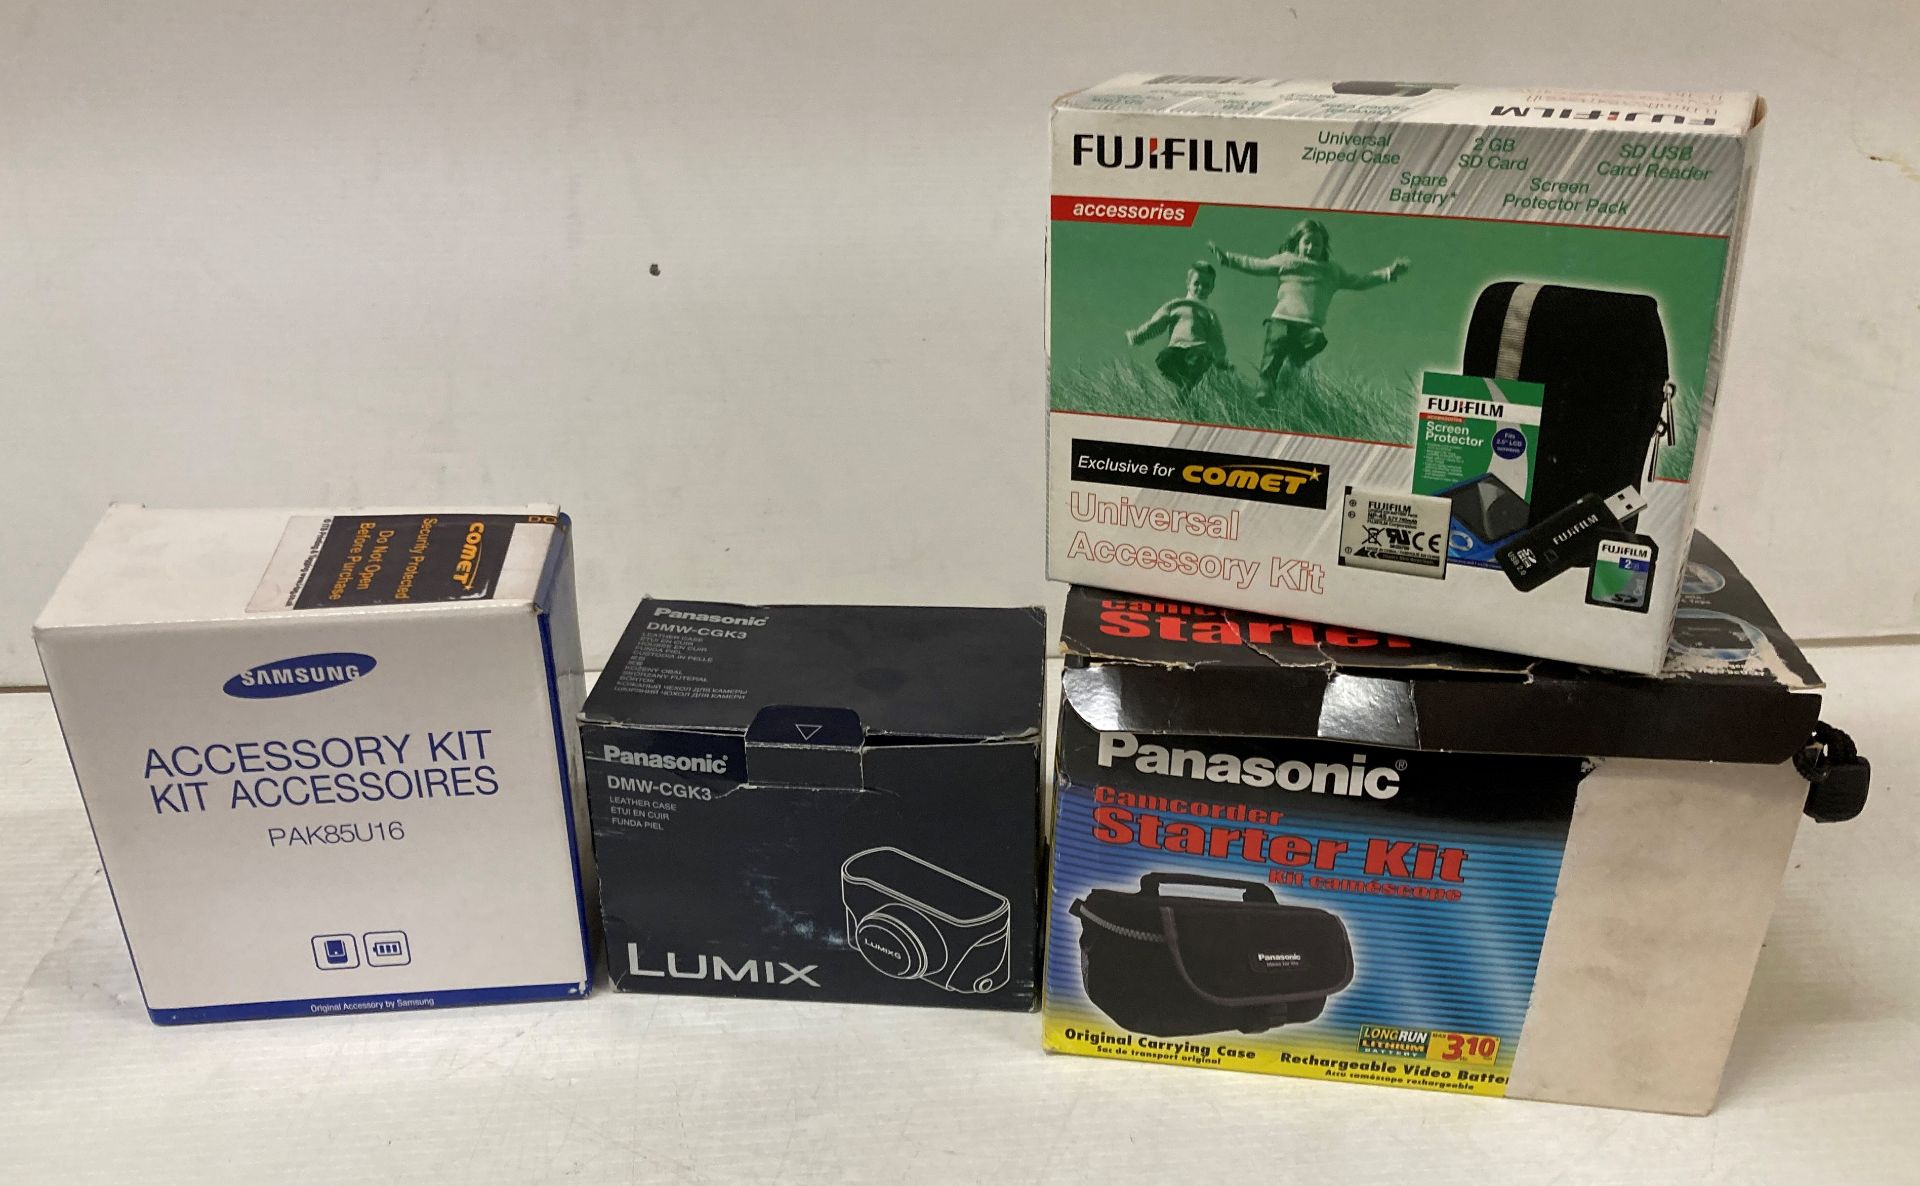 45 x assorted accessory kits, camera cases and camera bags by Fuji Film,